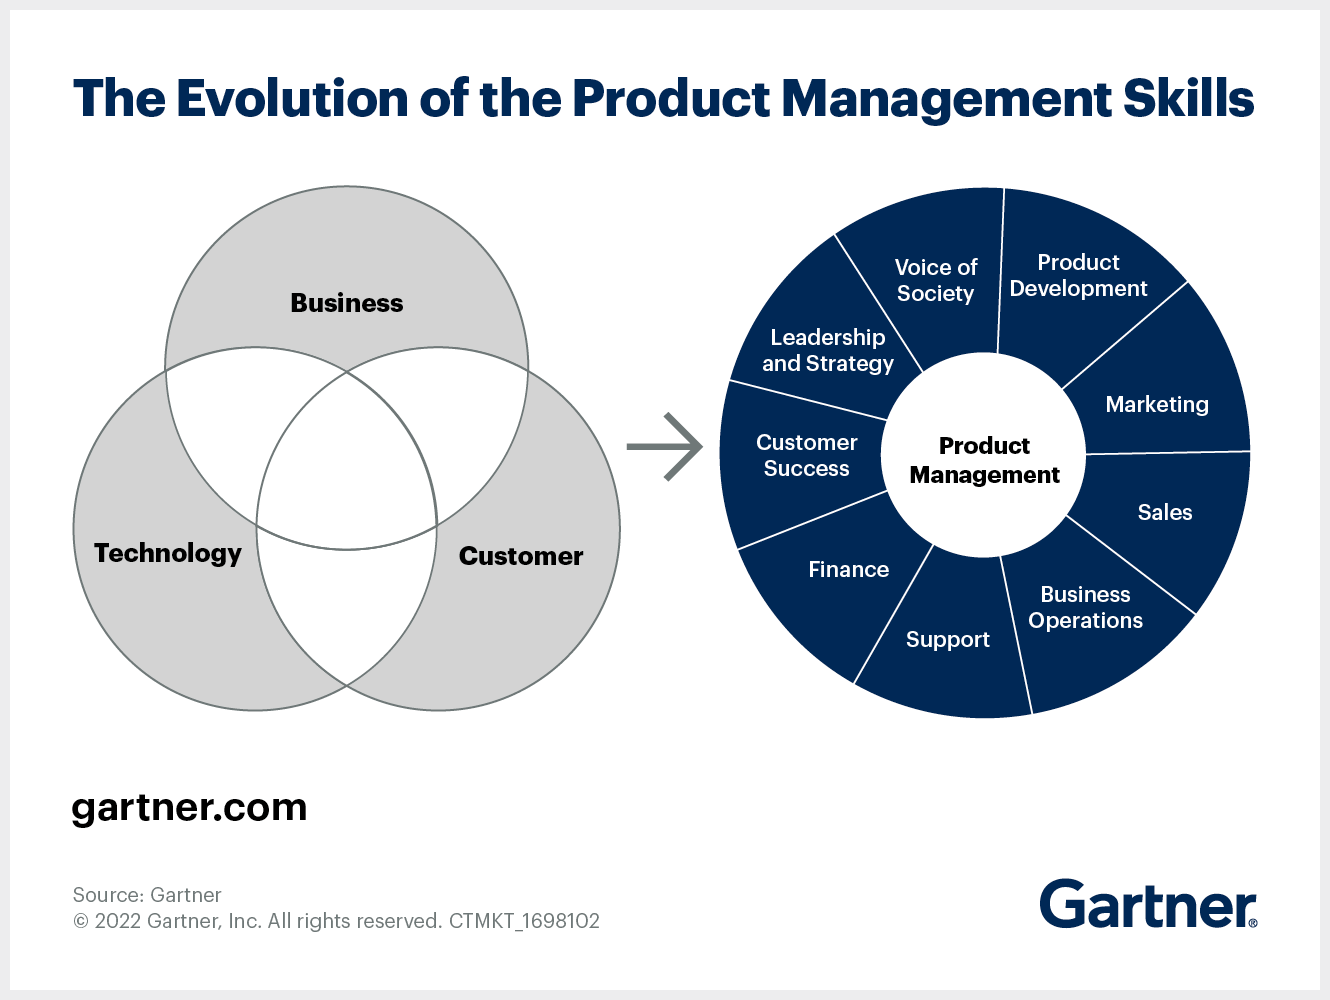 The Evolution of the Product Management Skills